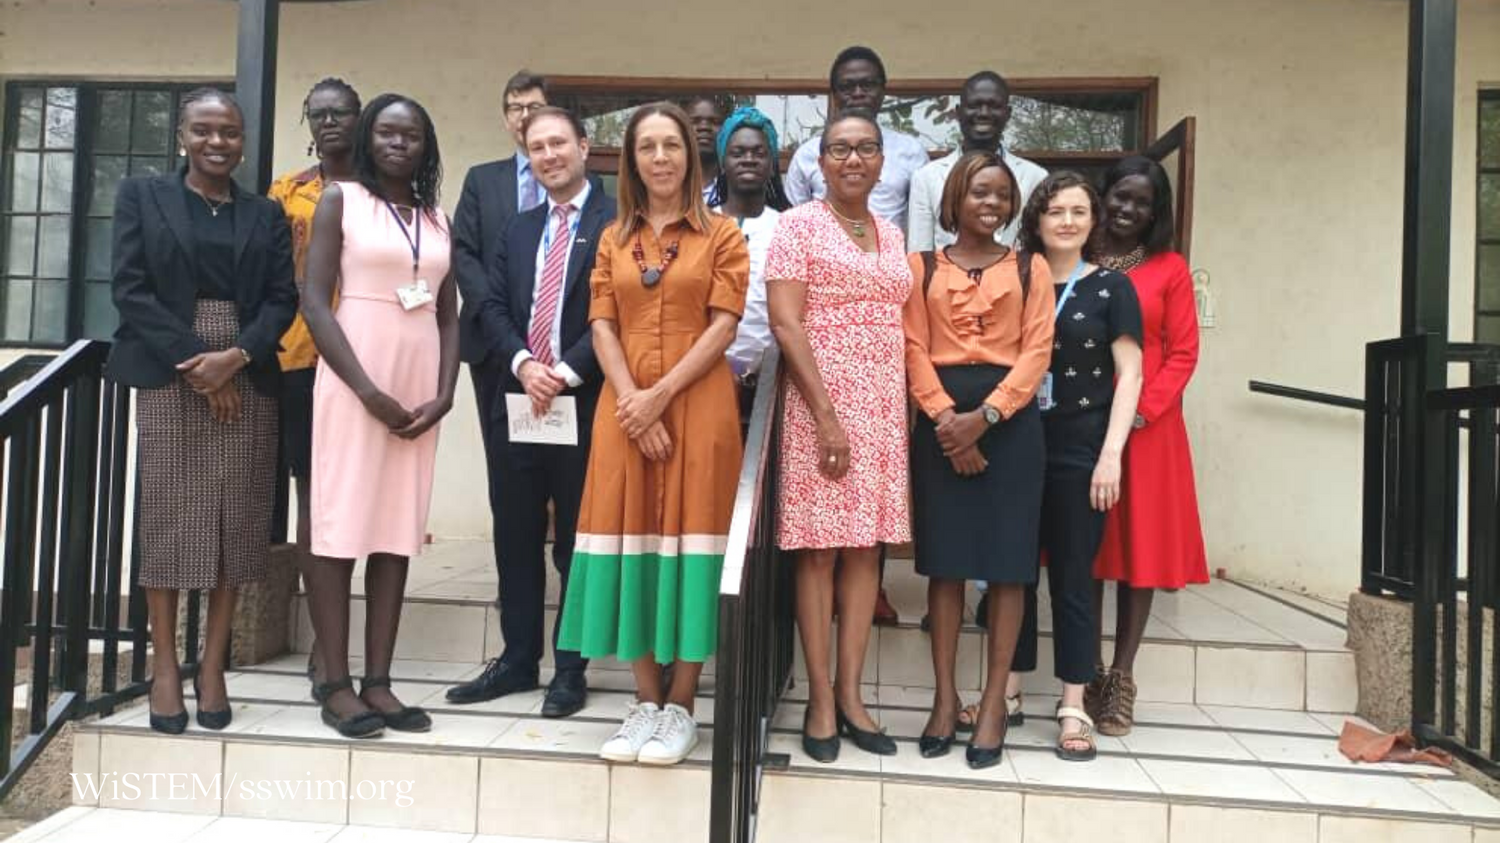 WiSTEM South Sudan Members Attend a Youth Roundtable Meeting at the British Embassy